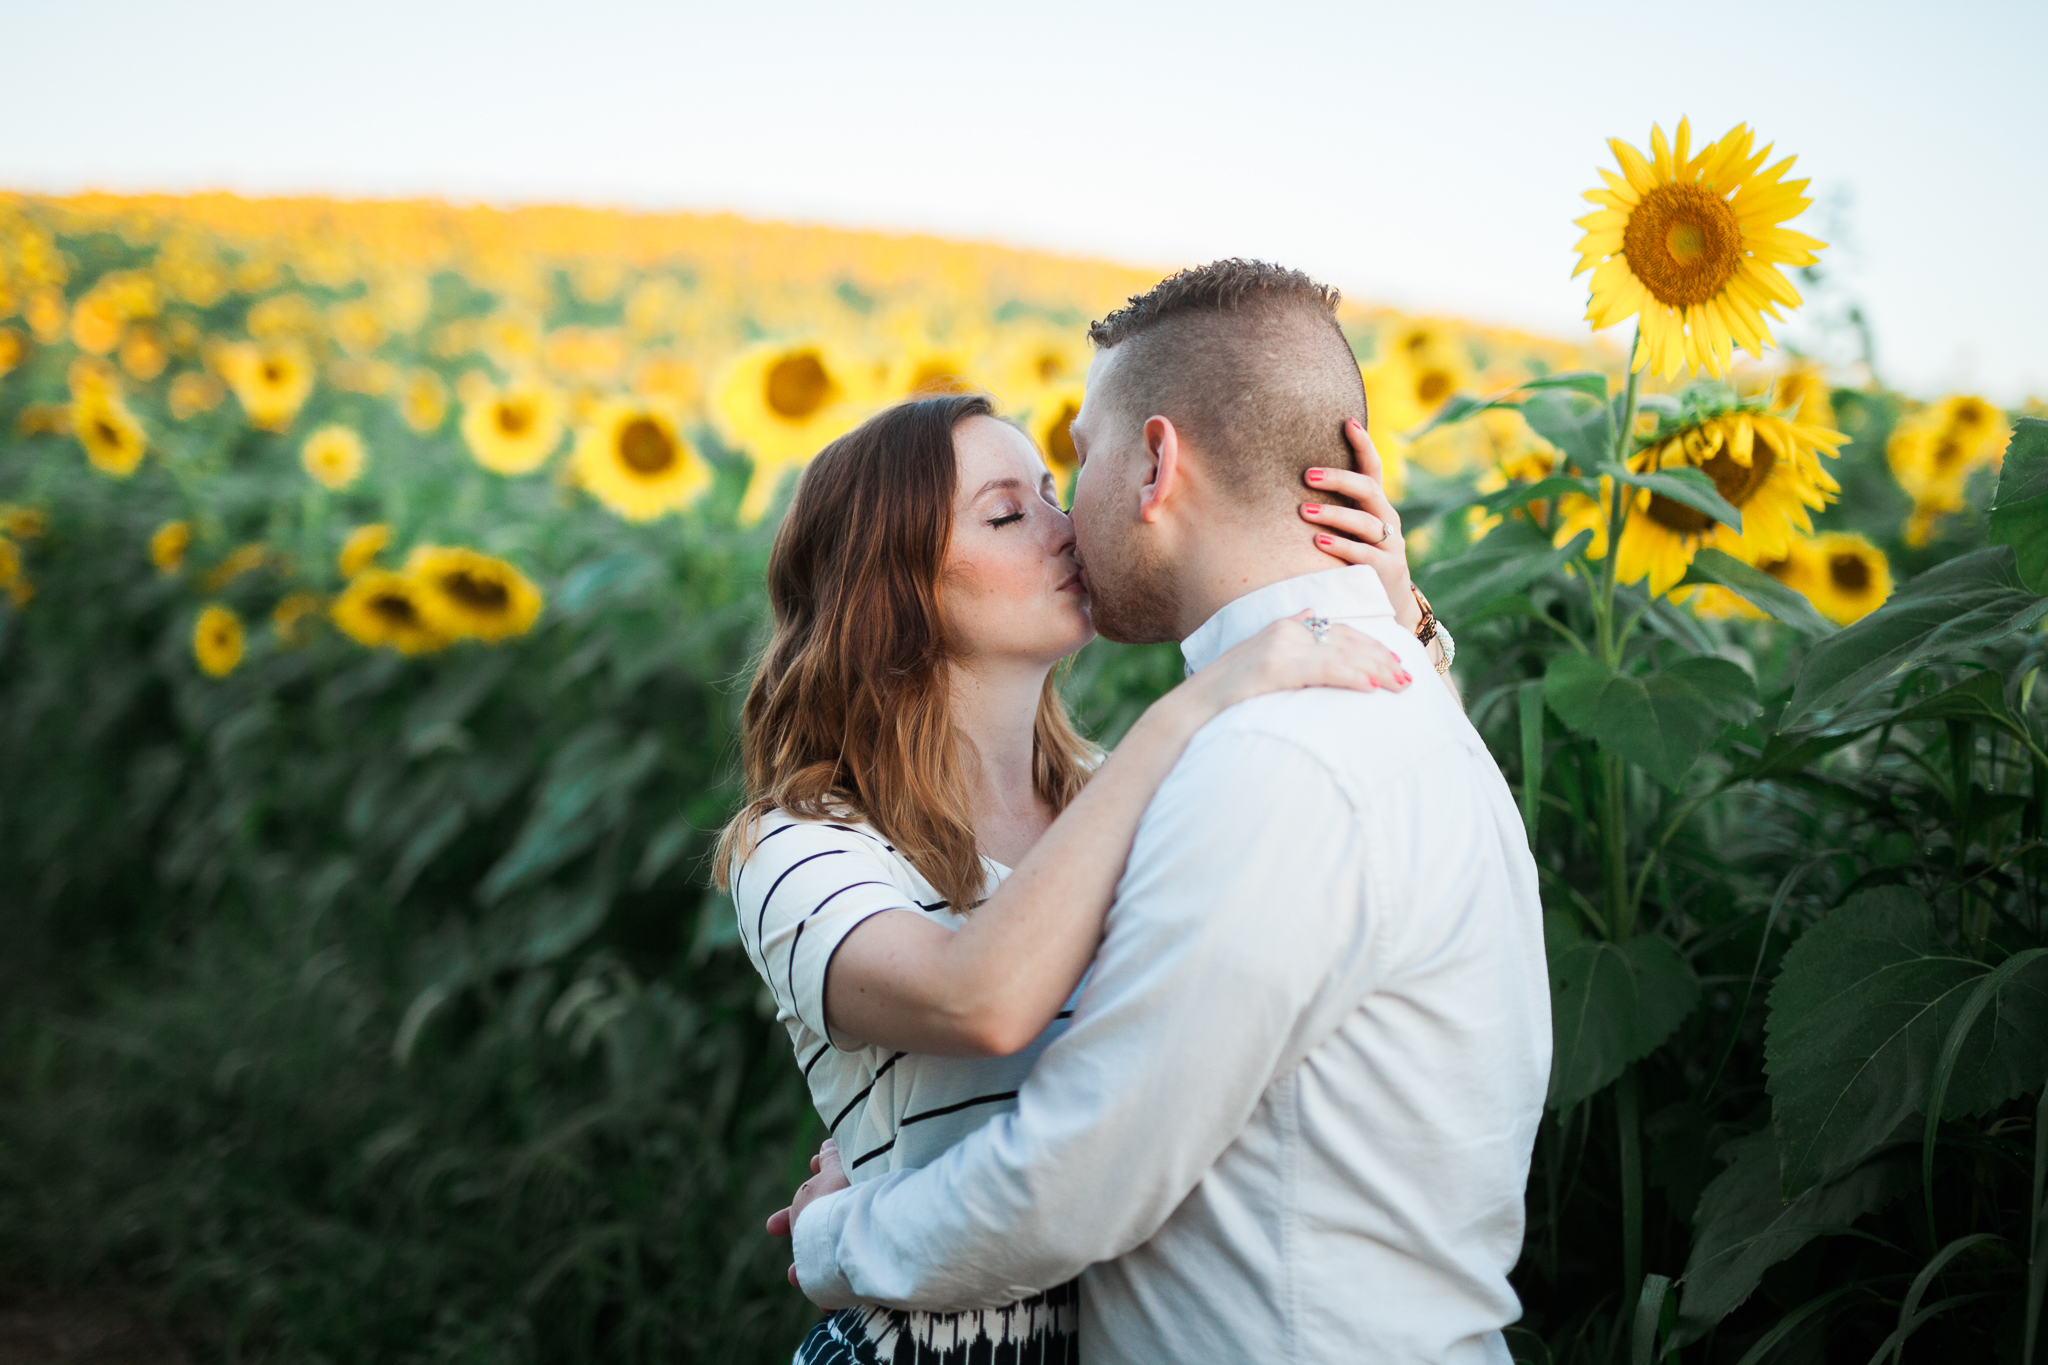 Pope-Farms-Sunflower-Engagement-Session-Madison-Wisconsin_035.jpg